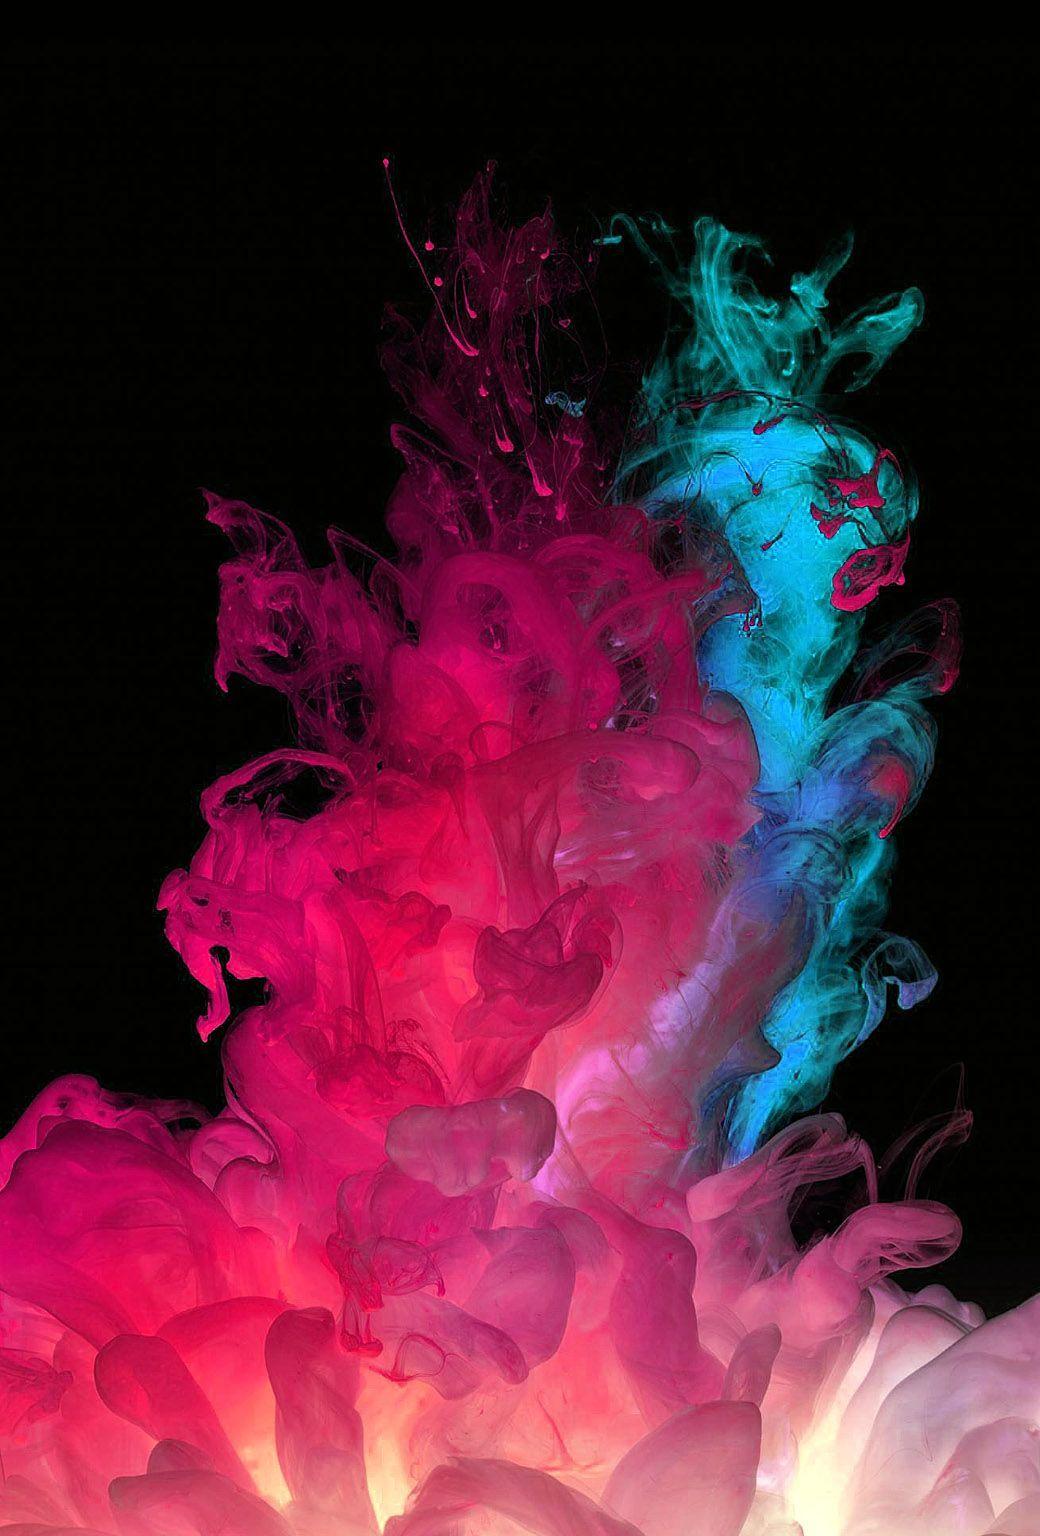 SUPER AWESOME PHONE WALLPAPERS FOR YOUUUUU!!!!!!!!. Smoke